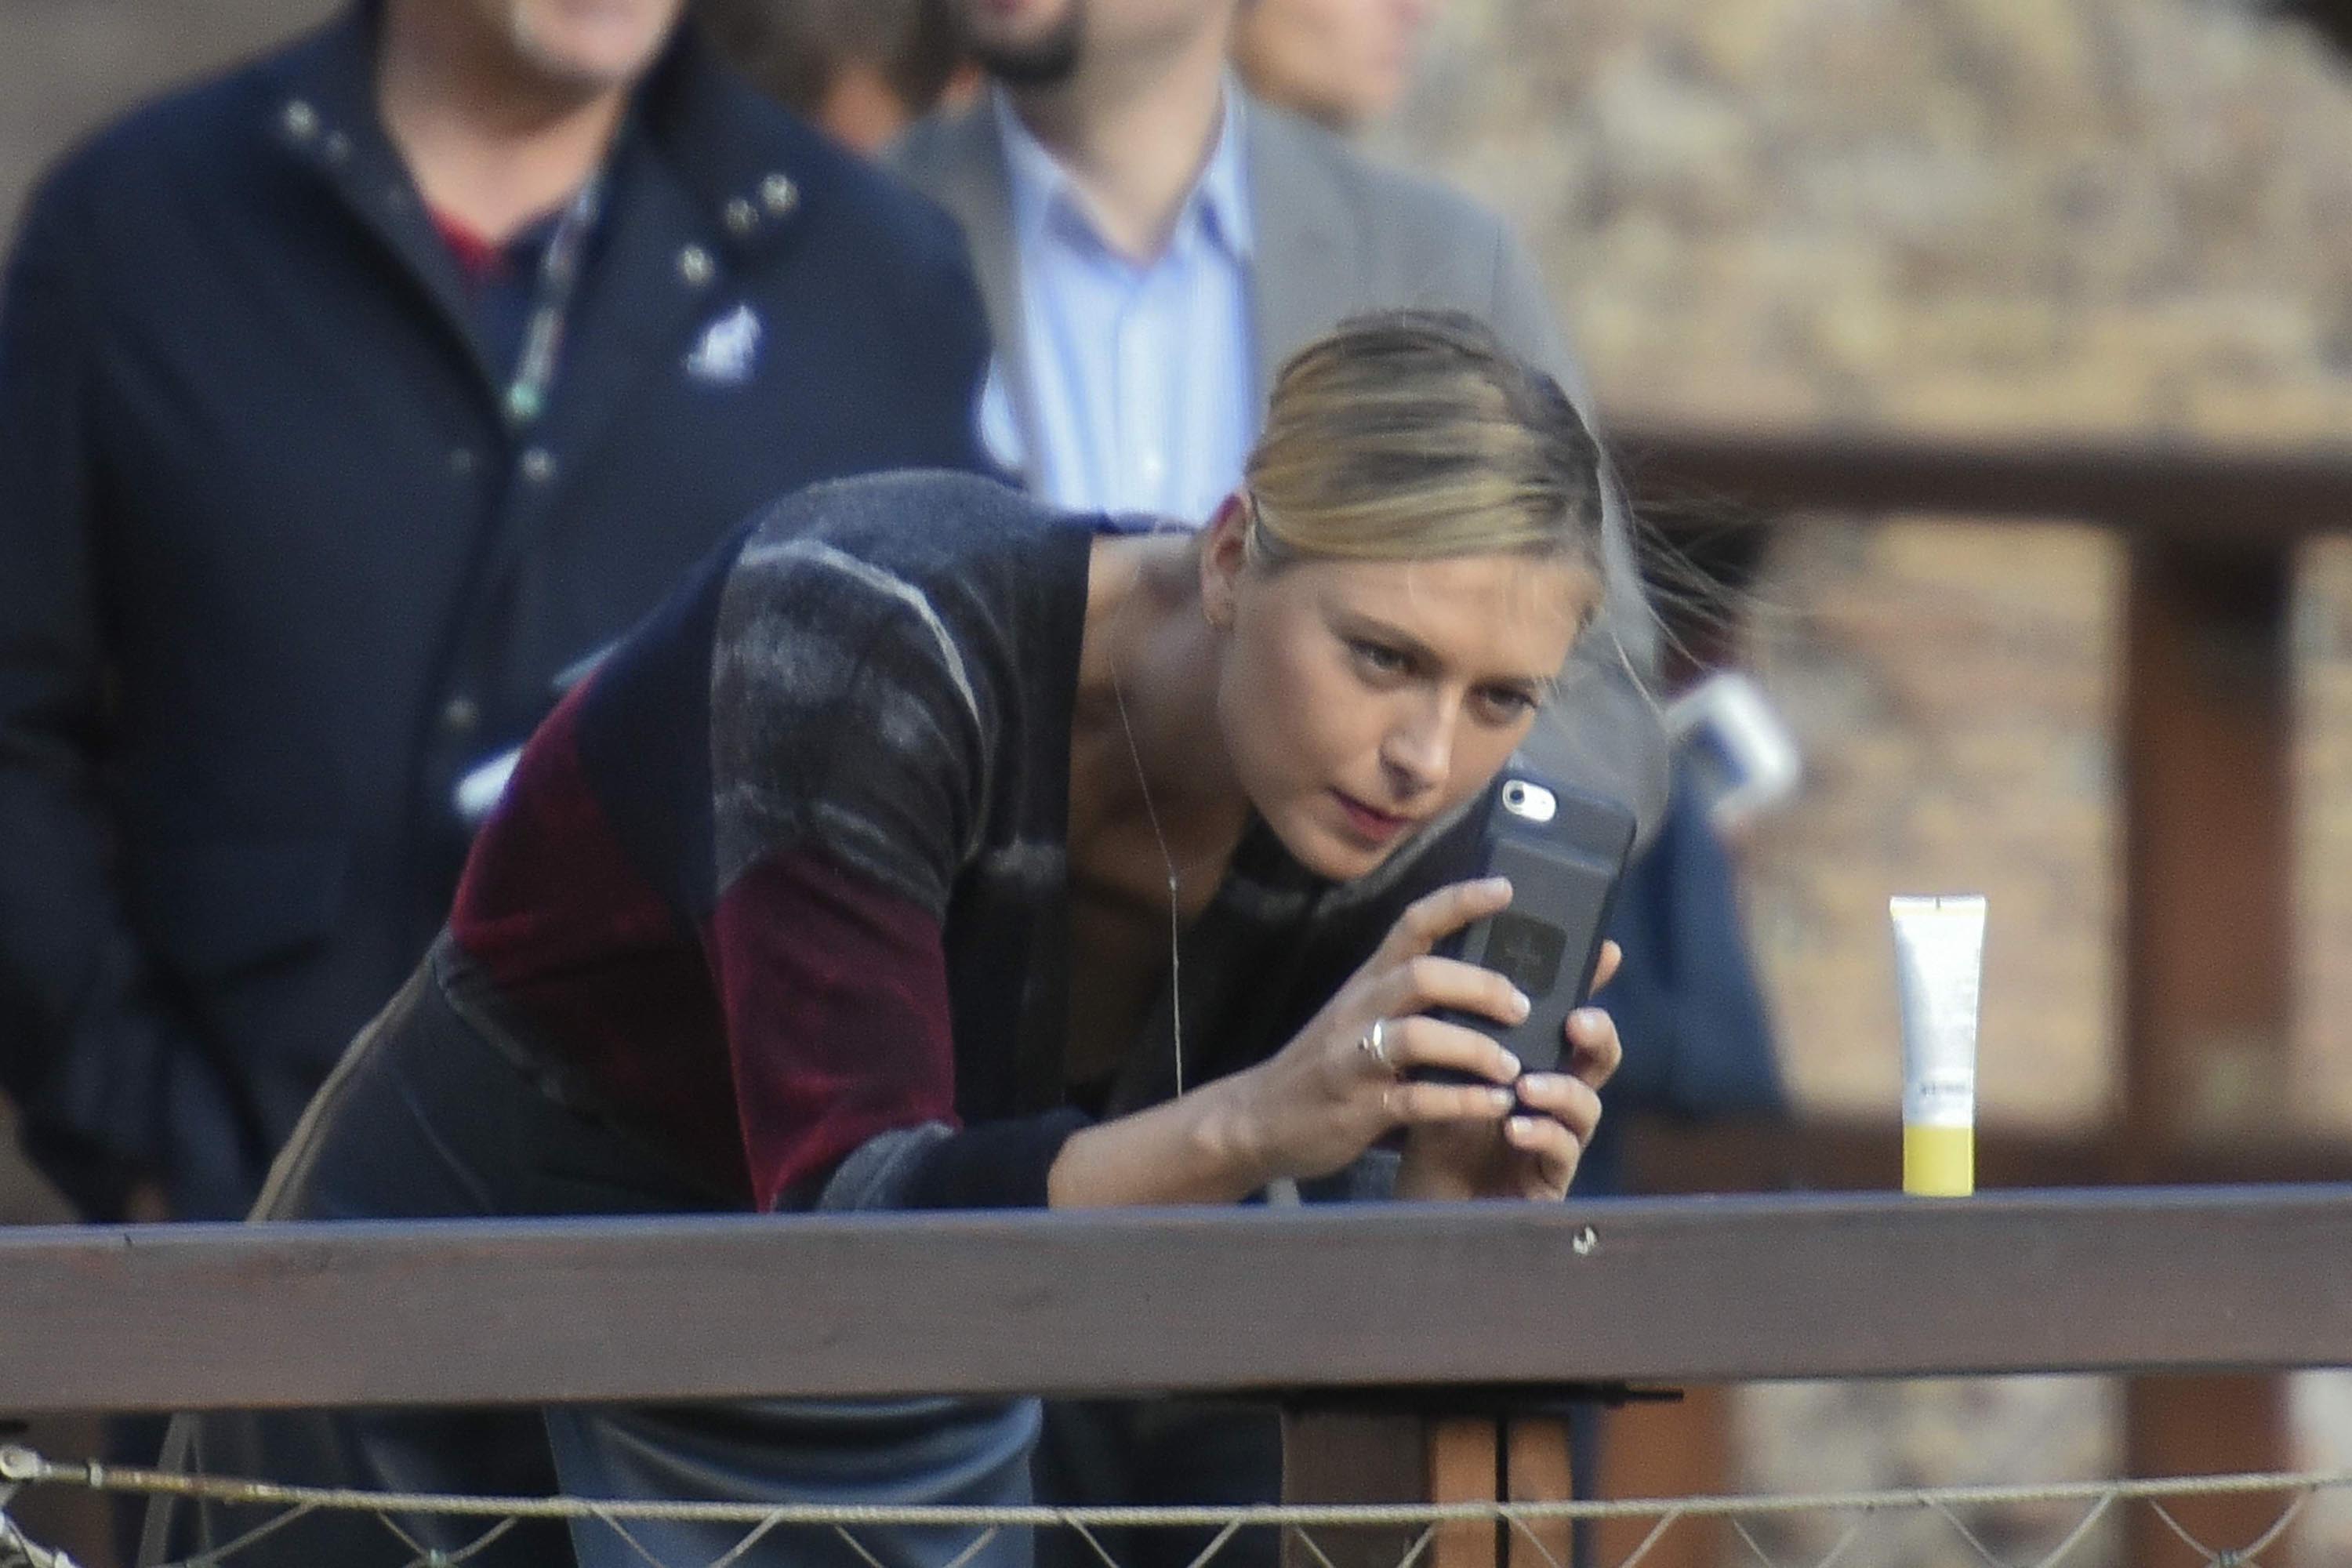 Maria Sharapova out and about in Rome